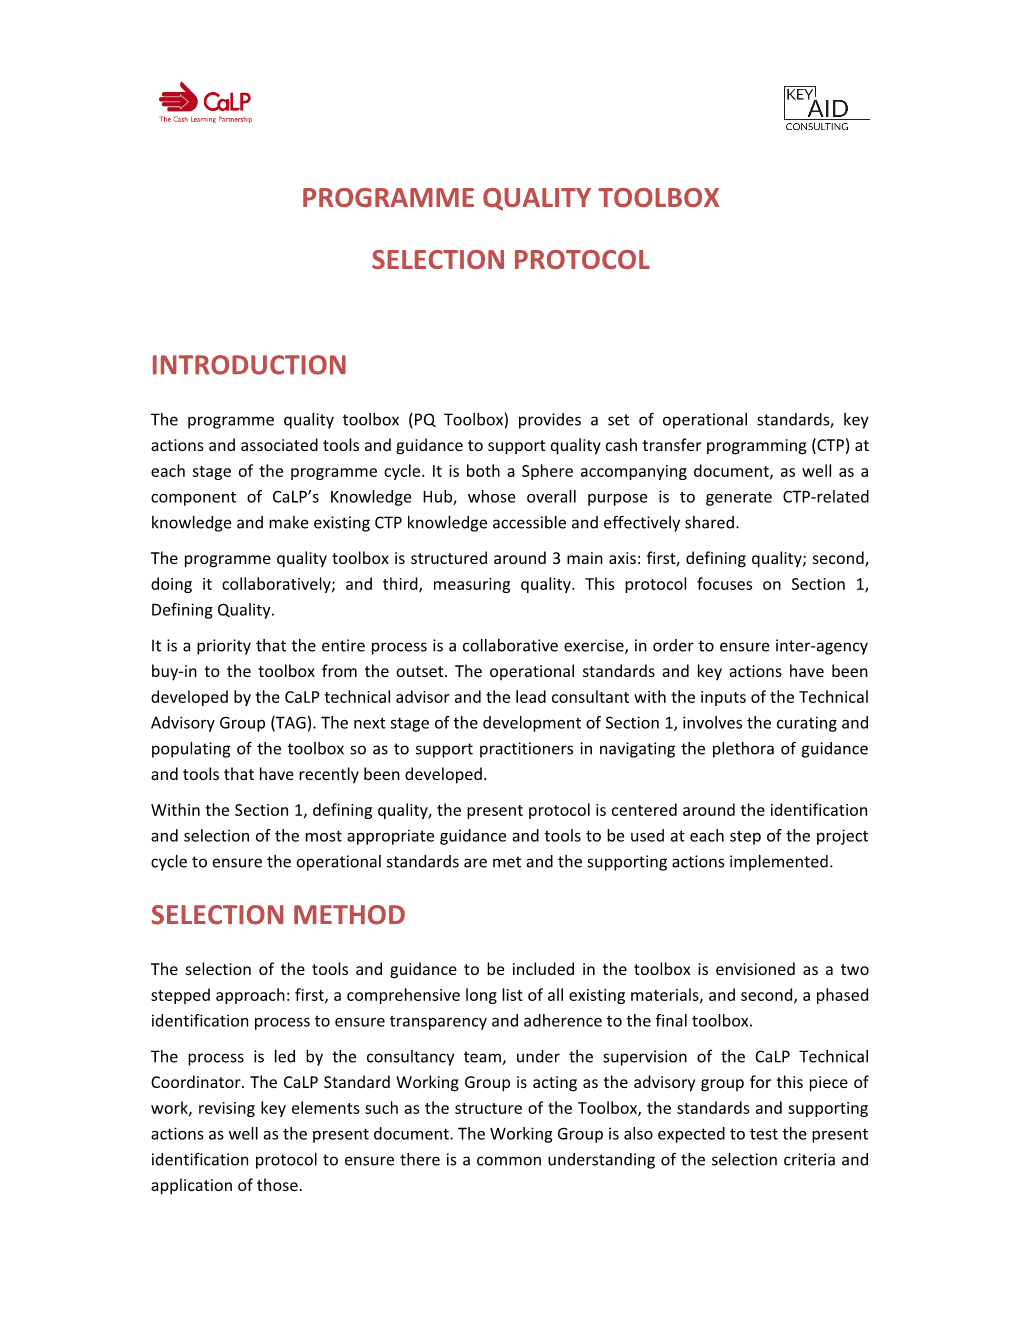 Programme Quality Toolbox